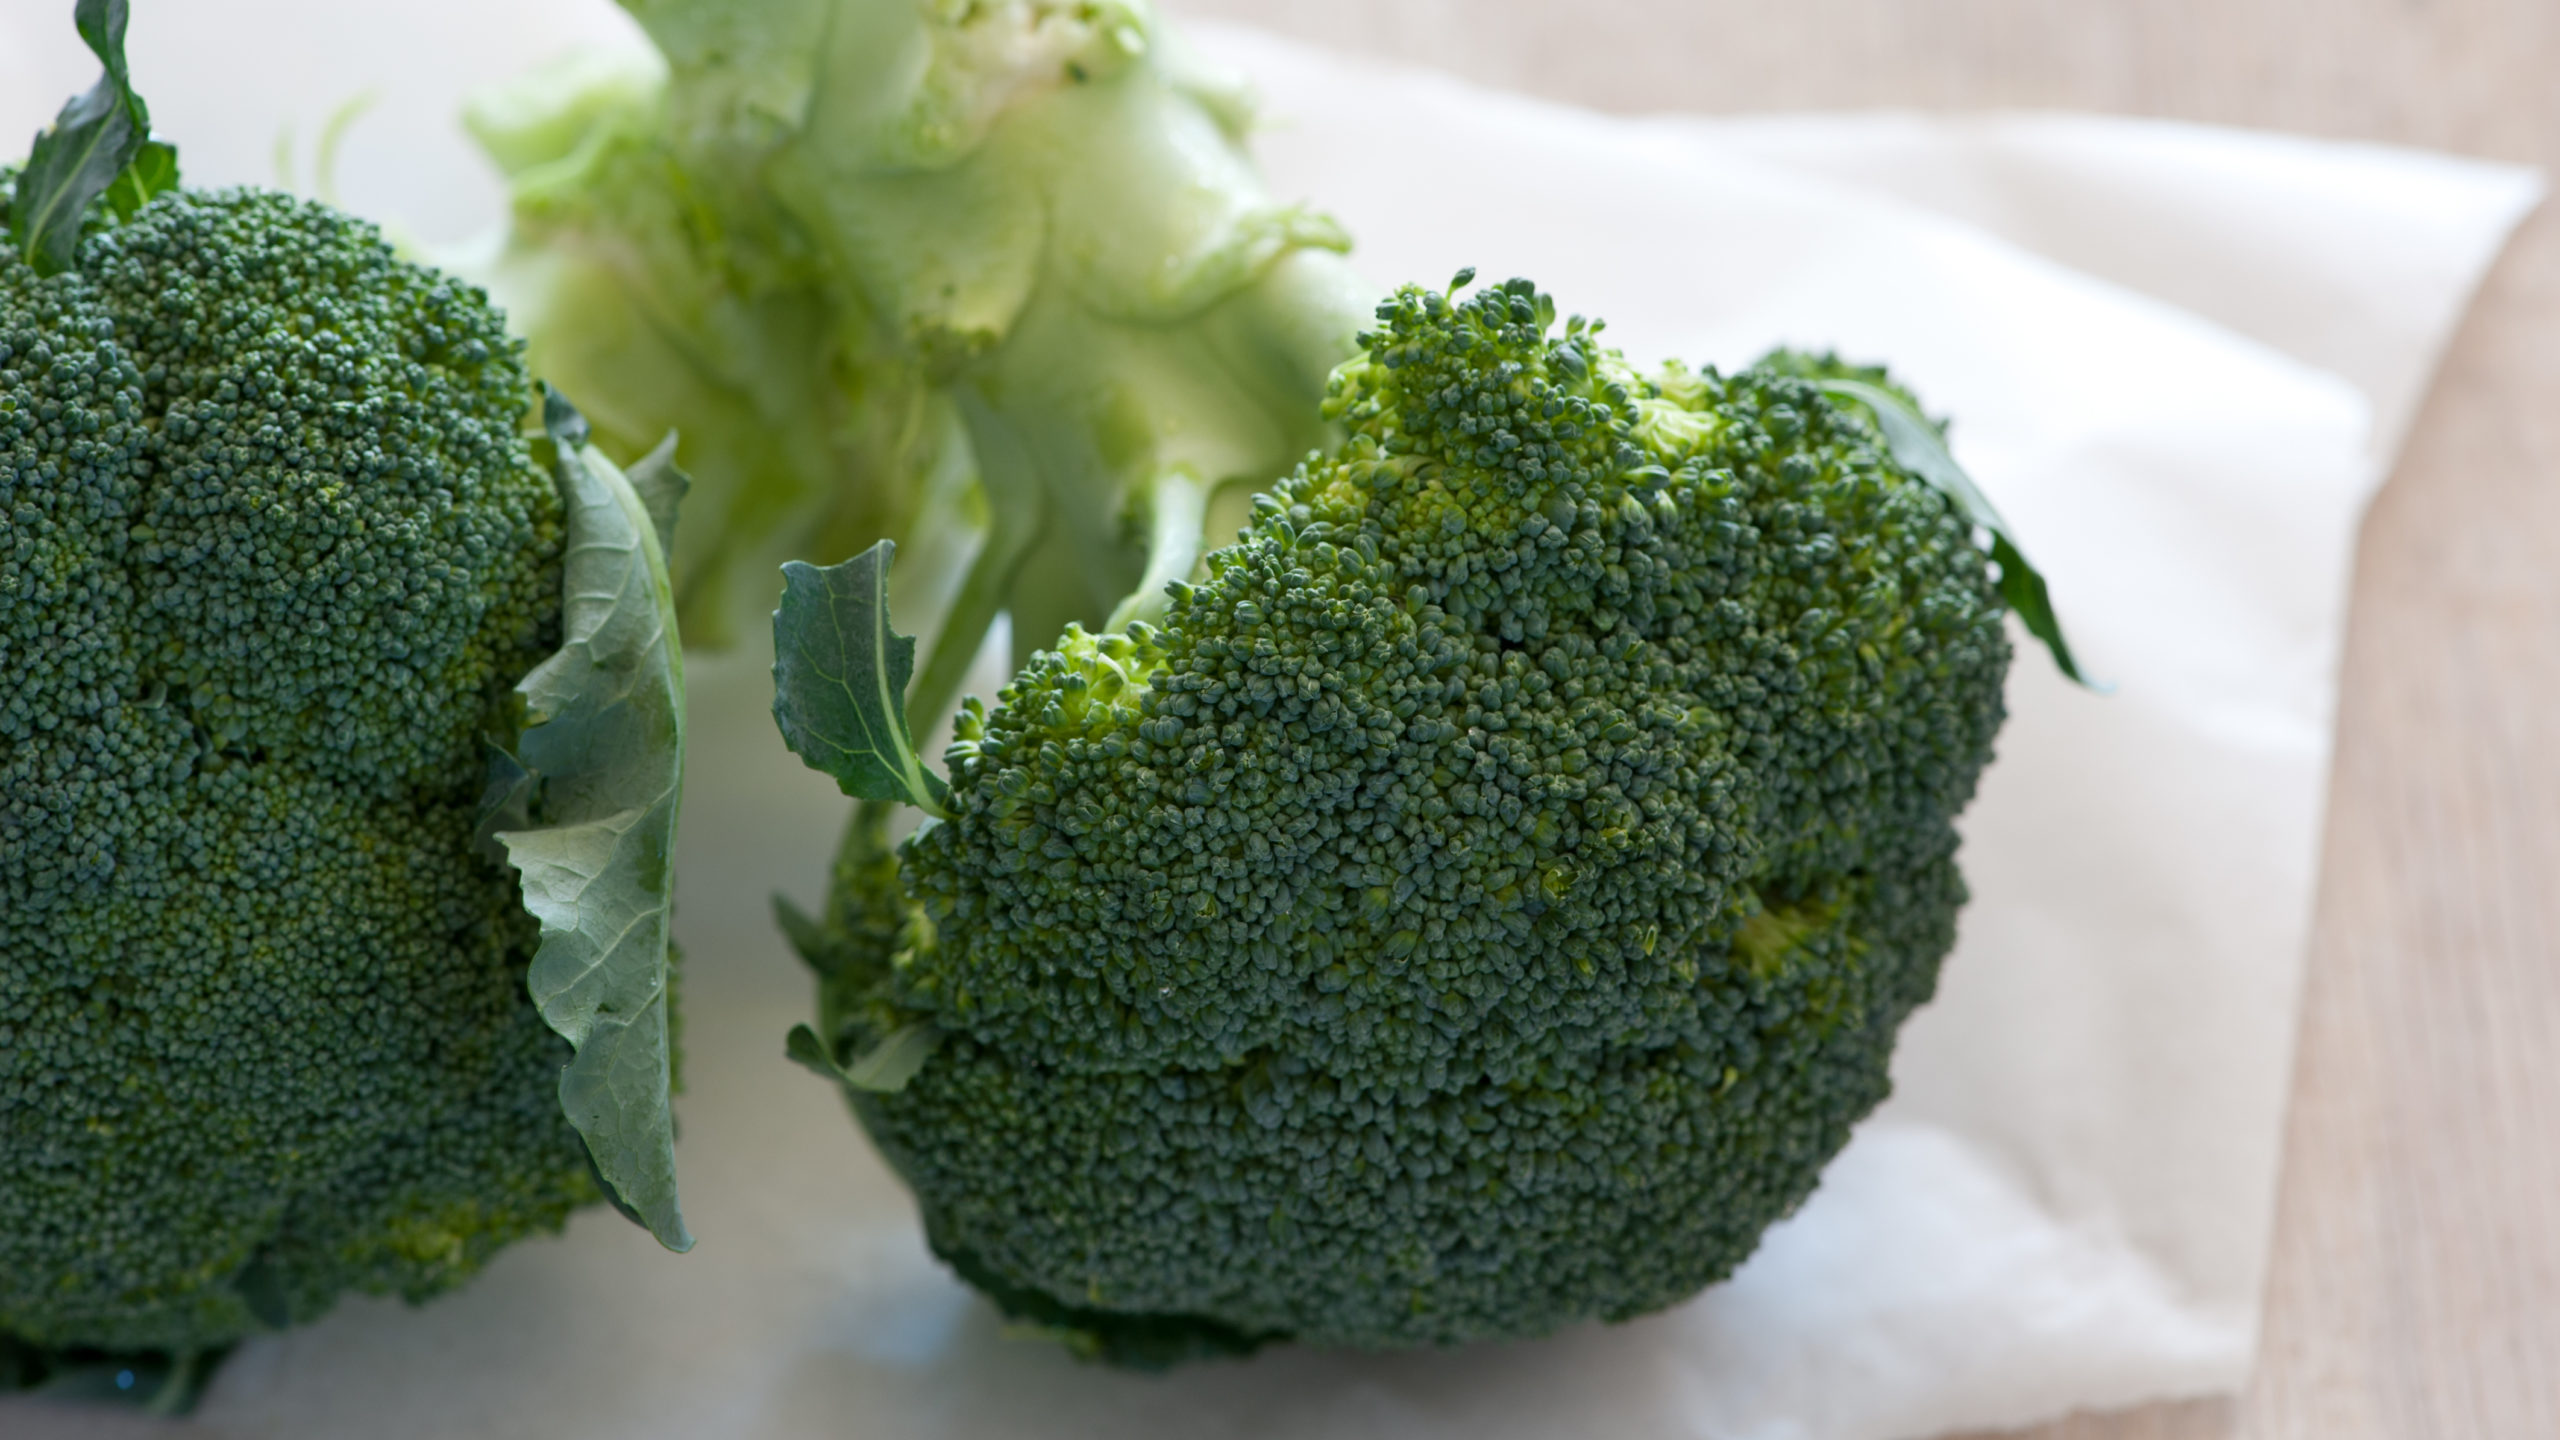 What To Do With Tough, Woody Broccoli Stems